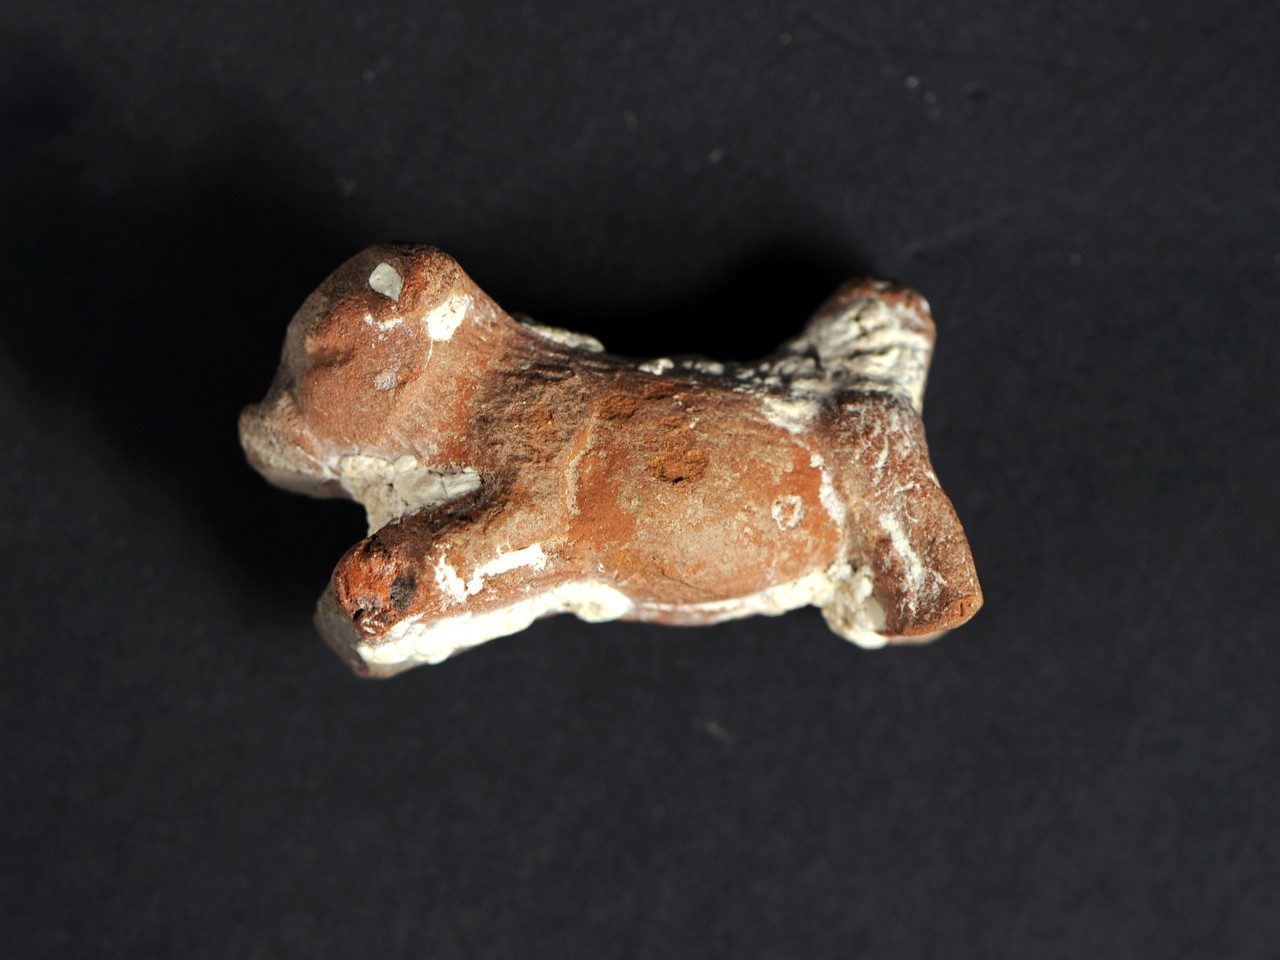 Small, red clay dog figurine with its legs stretched as though running.